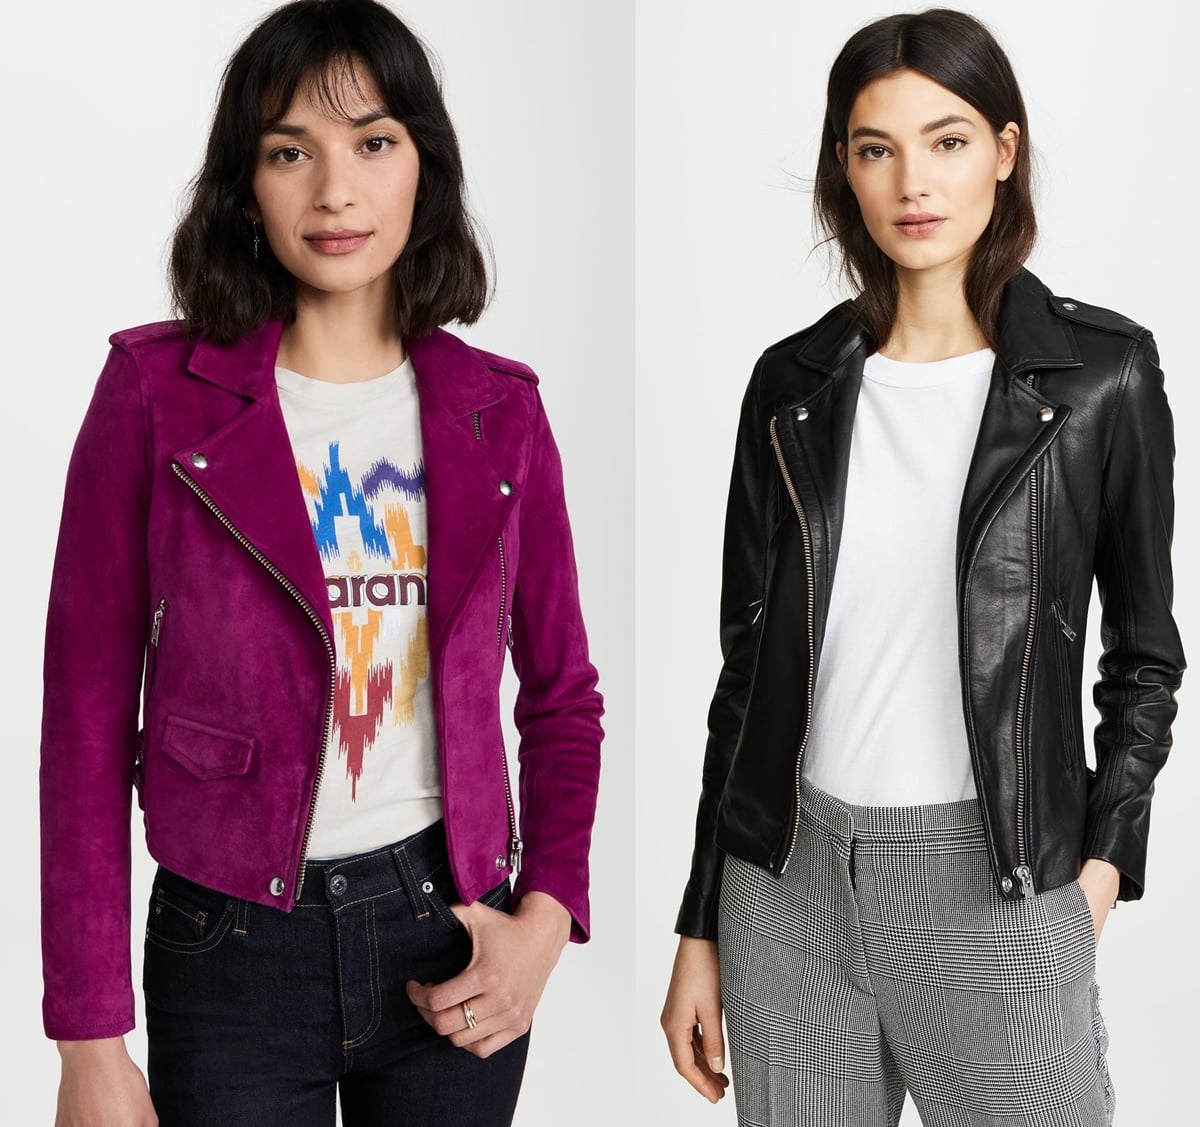 The magenta-purple IRO Ashley jacket and the black leather IRO Han jacket are both made in China